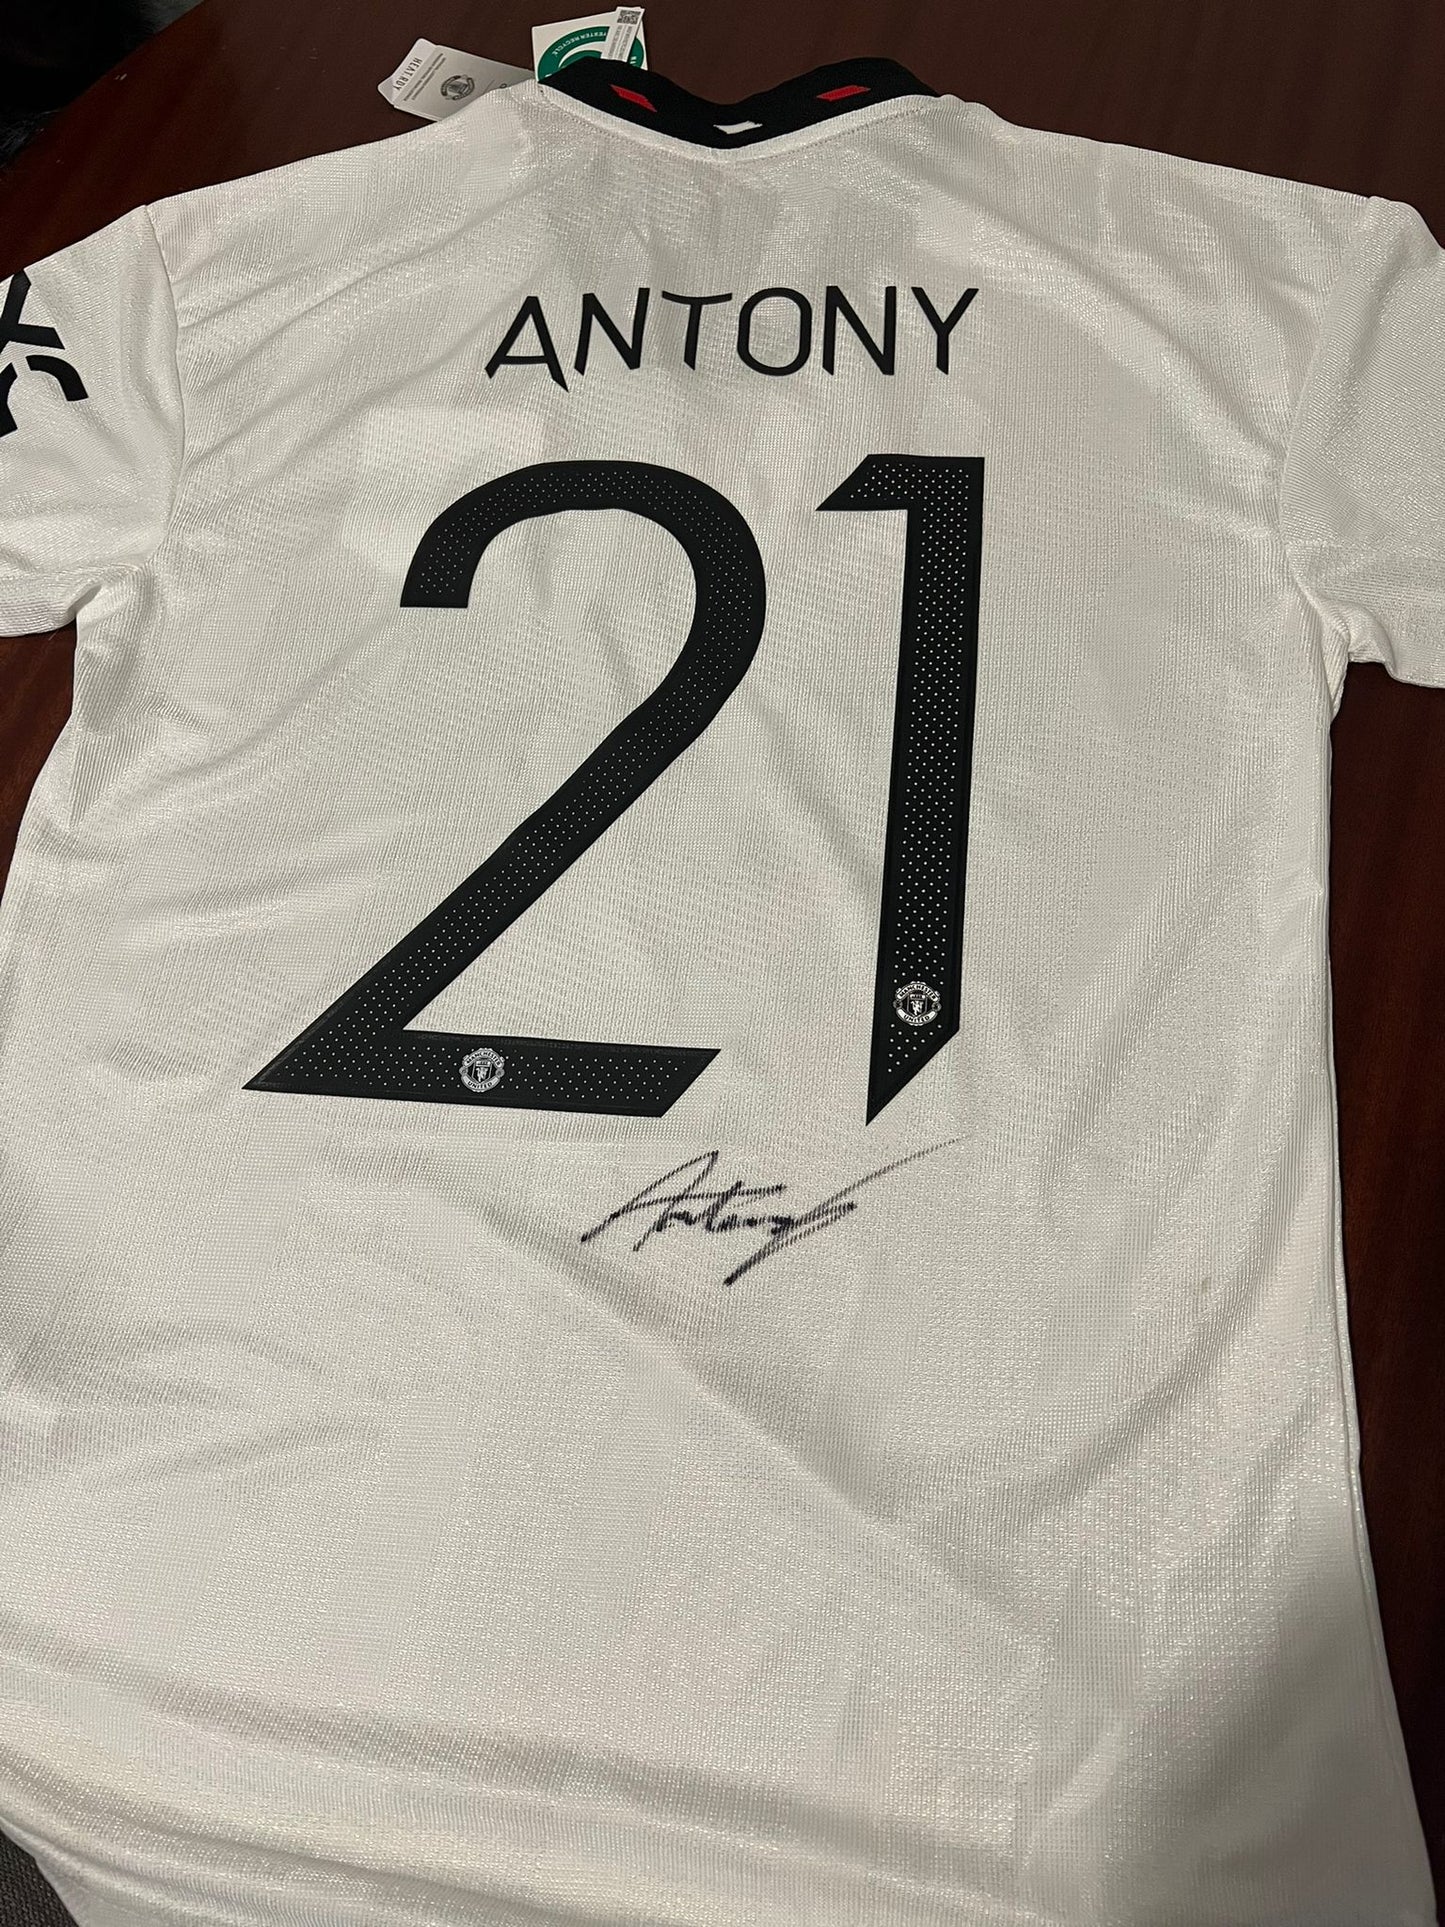 Signed Antony Manchester United Player’s Version Away Shirt